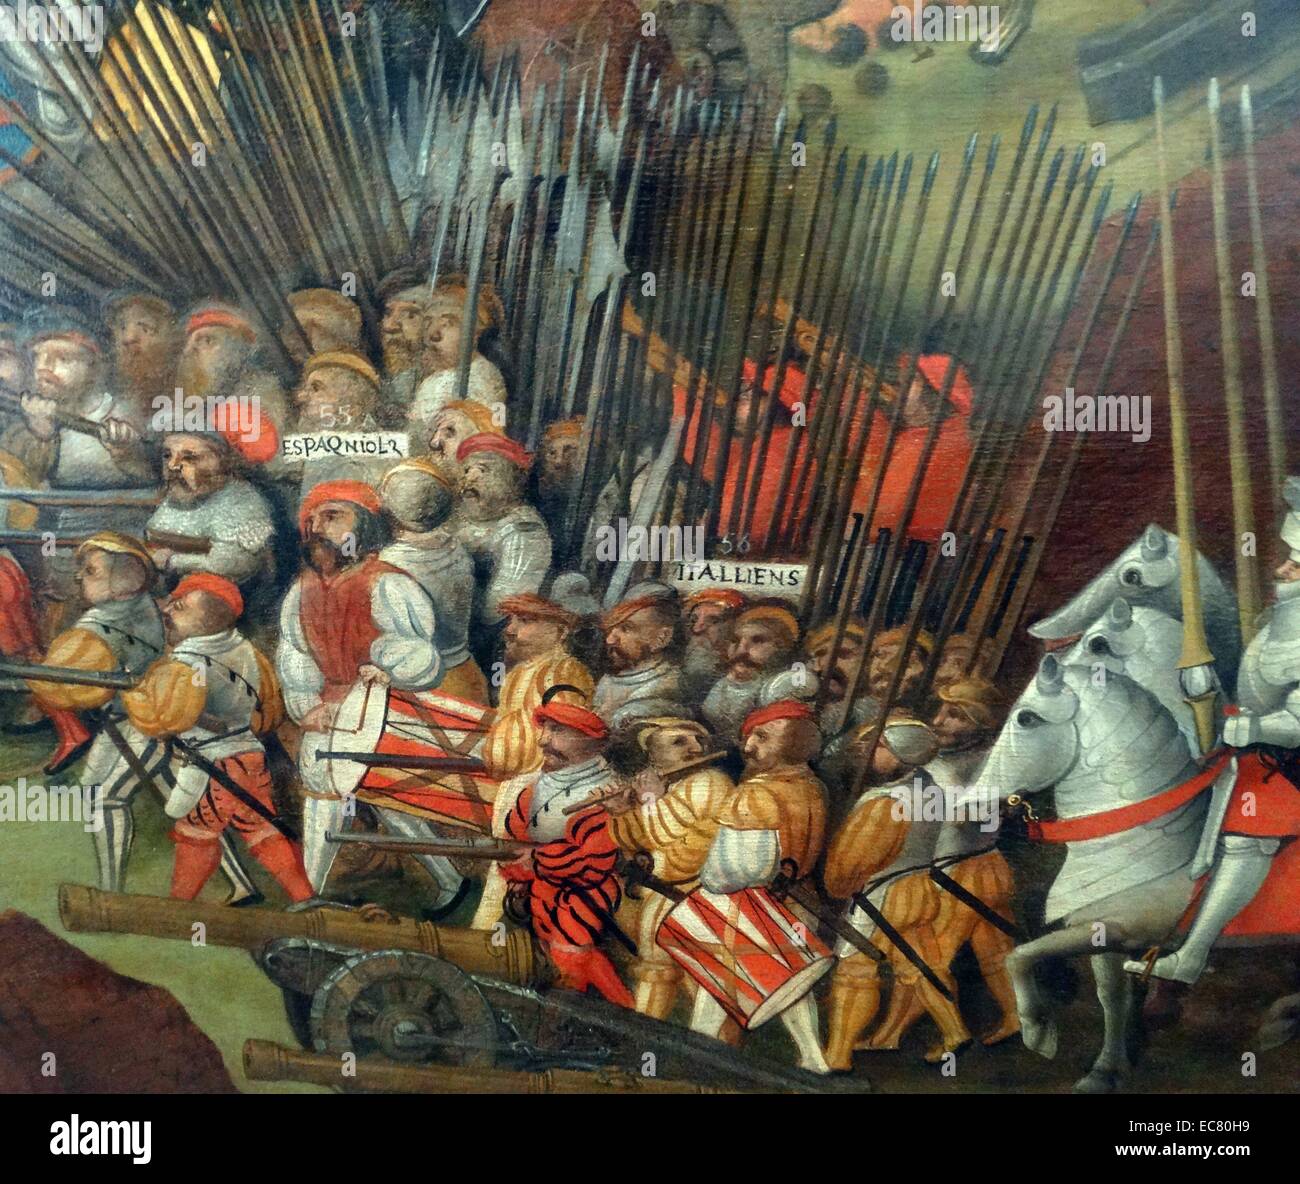 (detail from) The battle of Pavia painted 1525-1530 oil on wood by an unknown artist. The Battle of Pavia, 24 February 1525, was the decisive engagement of the Italian War of 1521–26. A Spanish-Imperial army attacked the French army under the personal command of Francis I of France. the French army was split and defeated Stock Photo